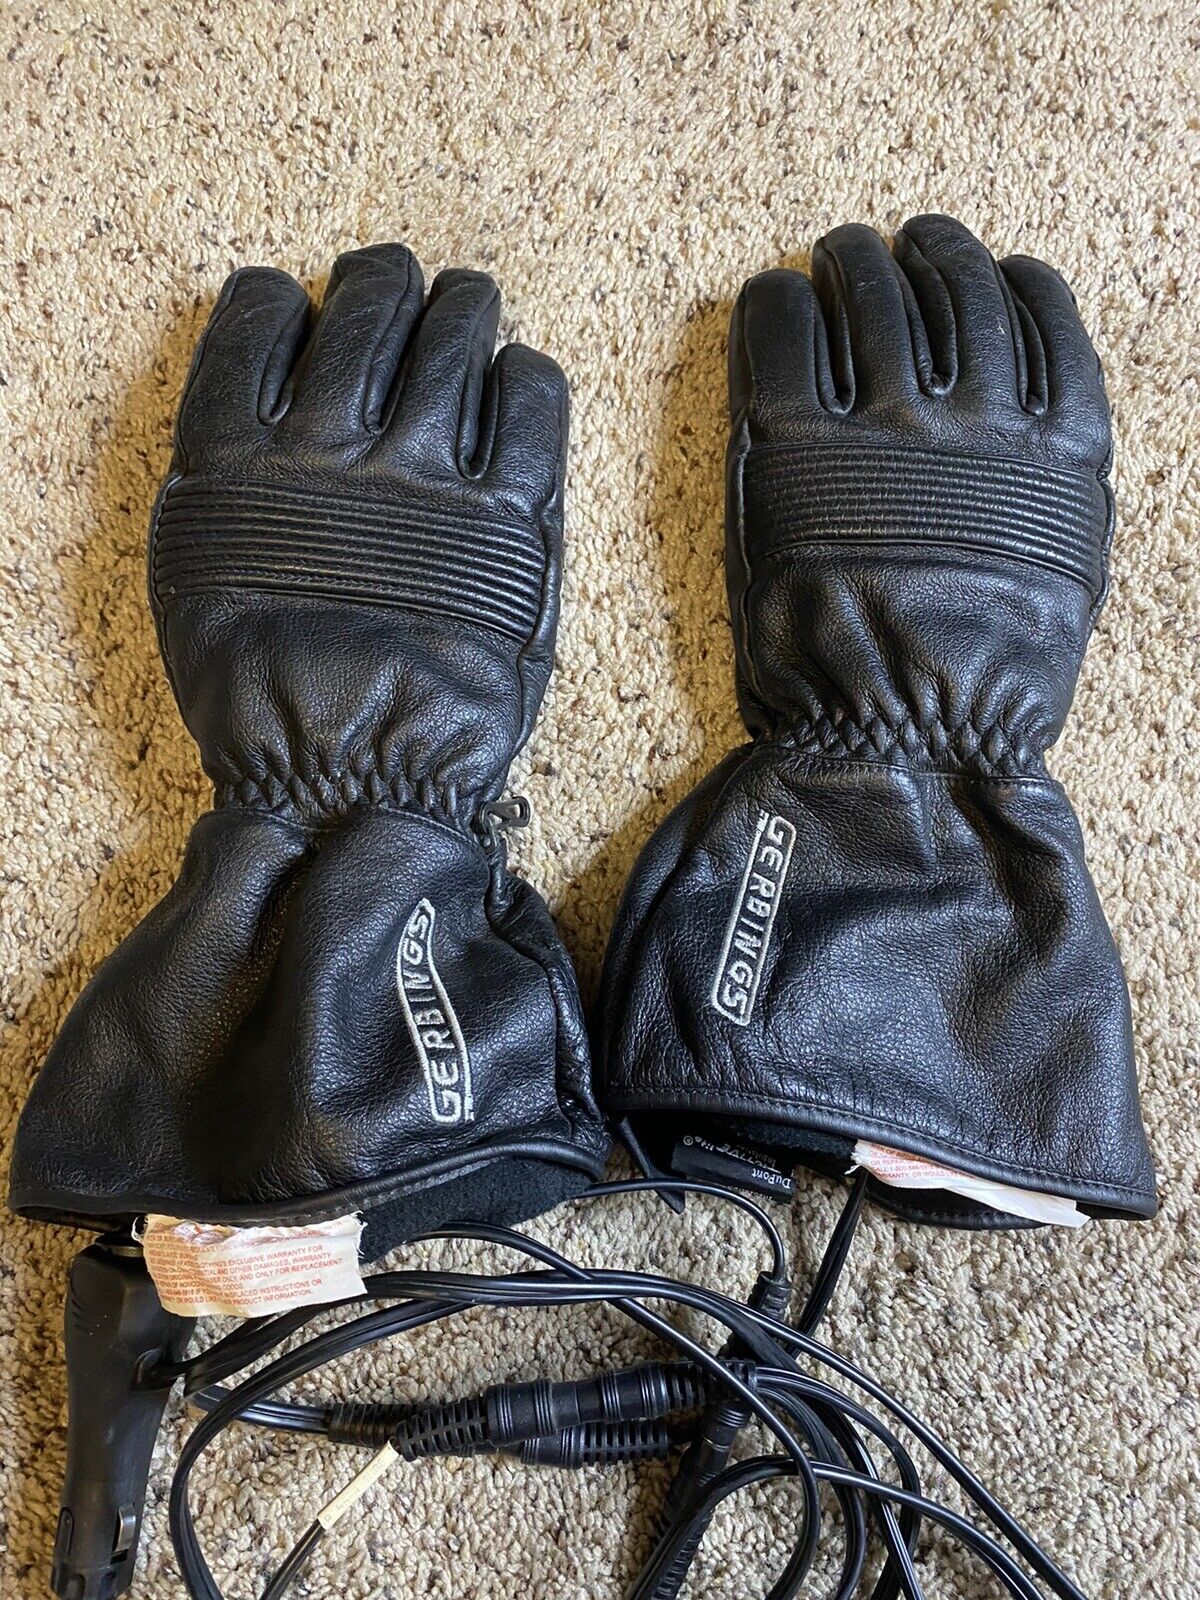 Gerbing Women’s Heated Black Leather Motorcycle Gloves 12V Size Large